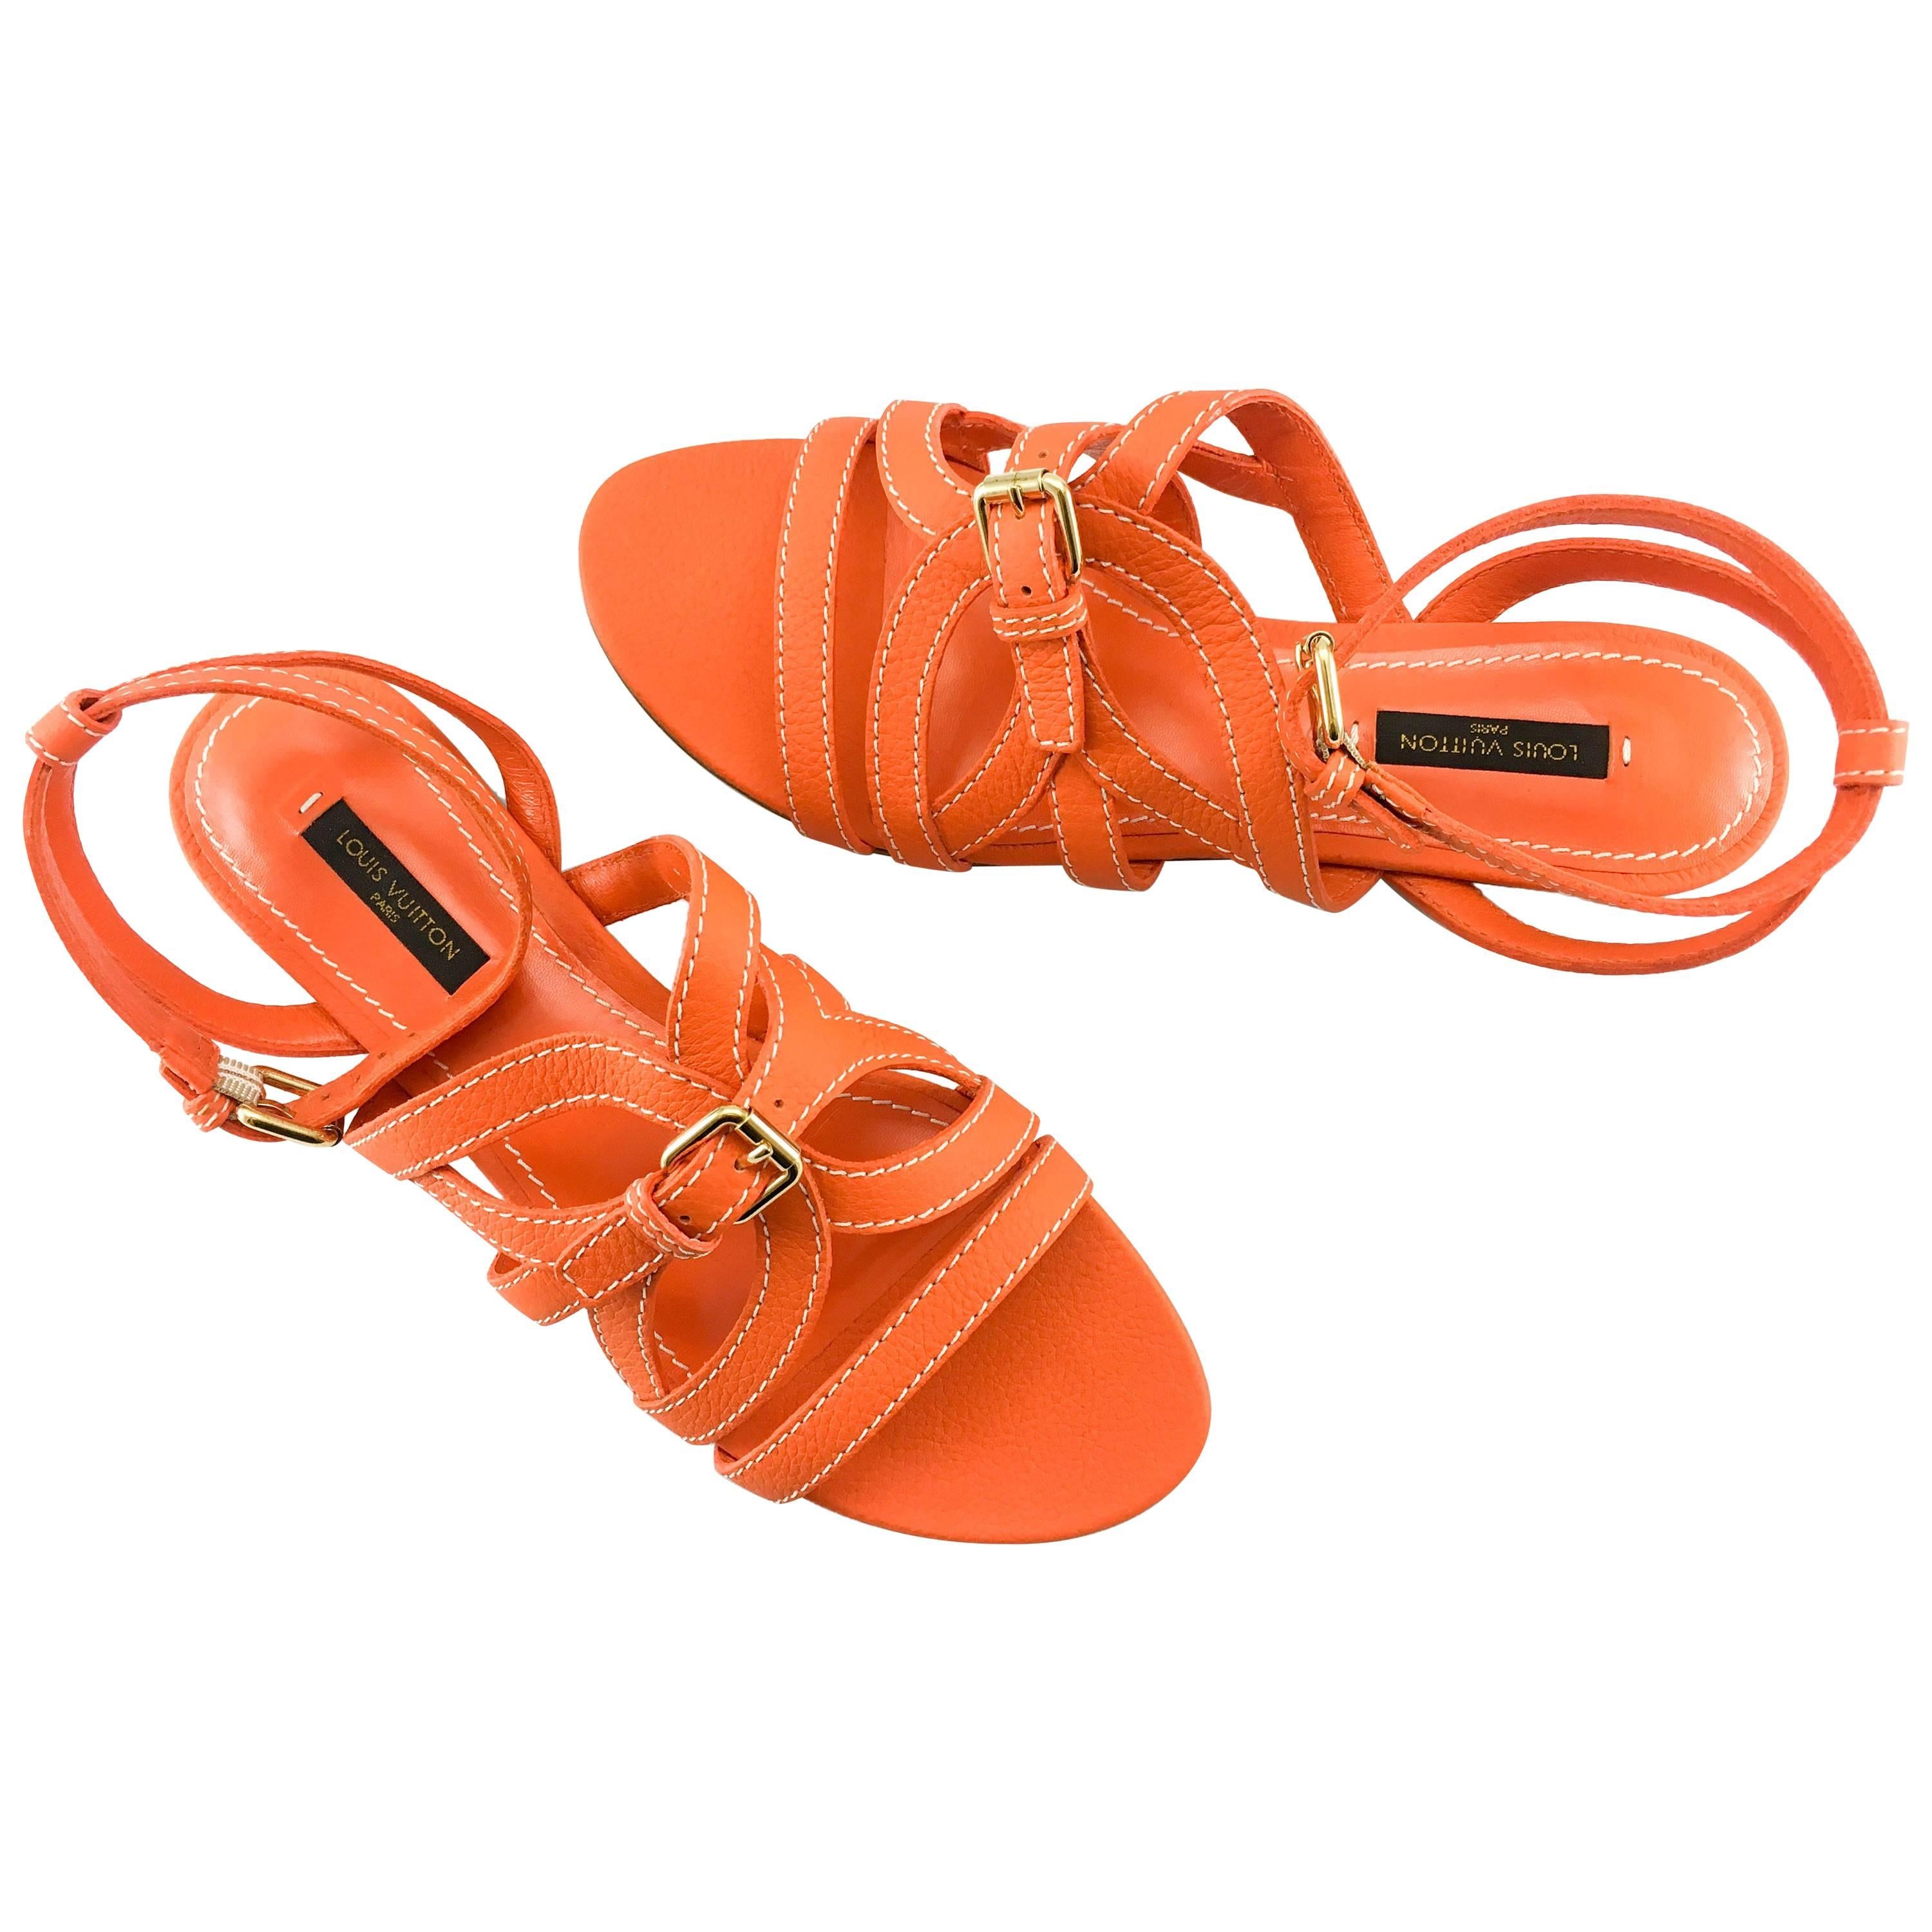 These really cool Louis Vuitton sandals are in unworn condition. Made in orange leather, these flat, strappy sandals feature one buckle on the ankle and one on the front. Really stylish, they are certain to steal the attention in the hot months of